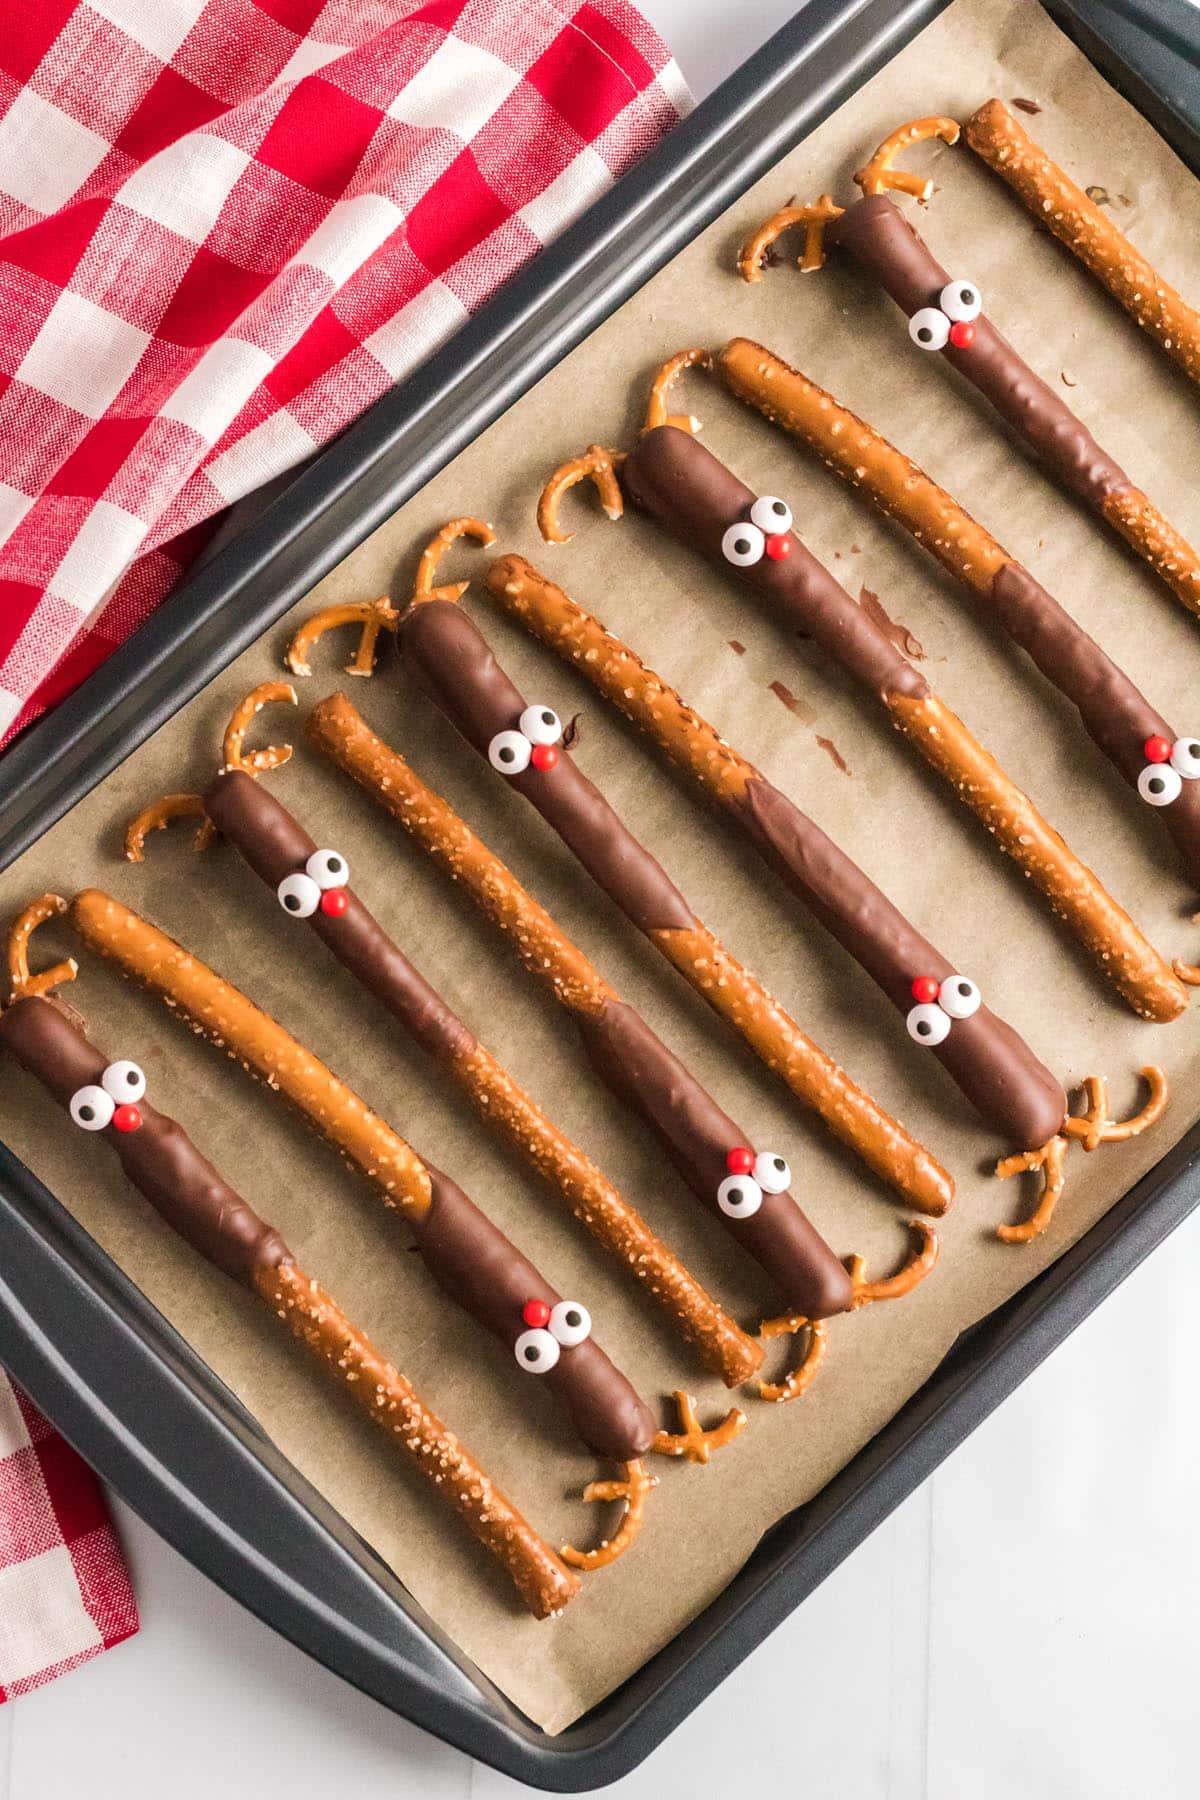 place the pretzel “antlers” into the chocolate.